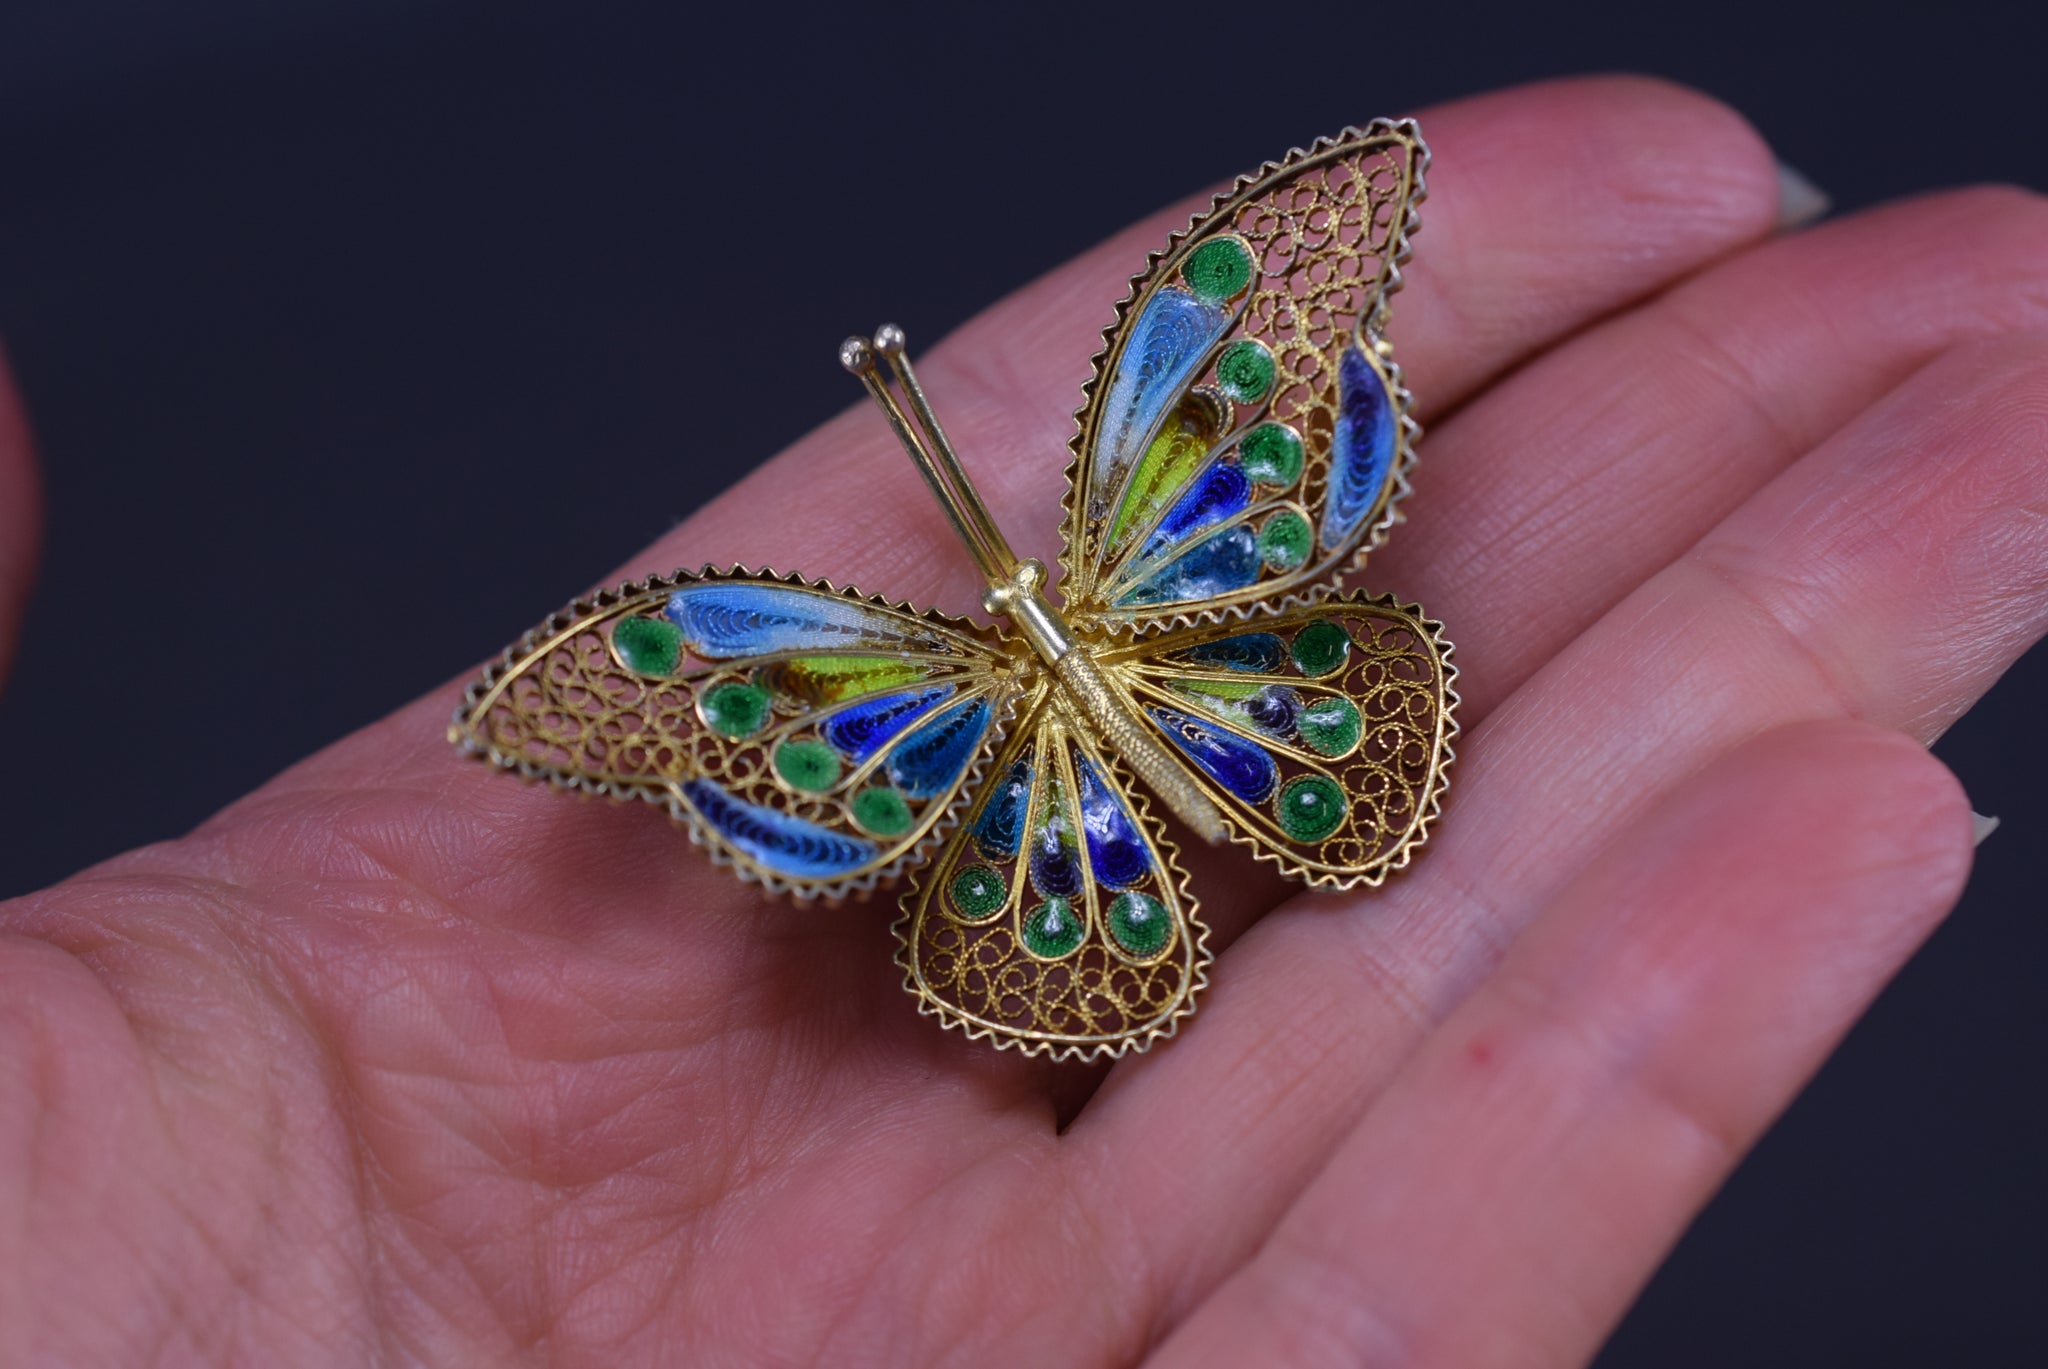 800 Silver Gold Plated Antique Enamel Butterfly Pin Brooch